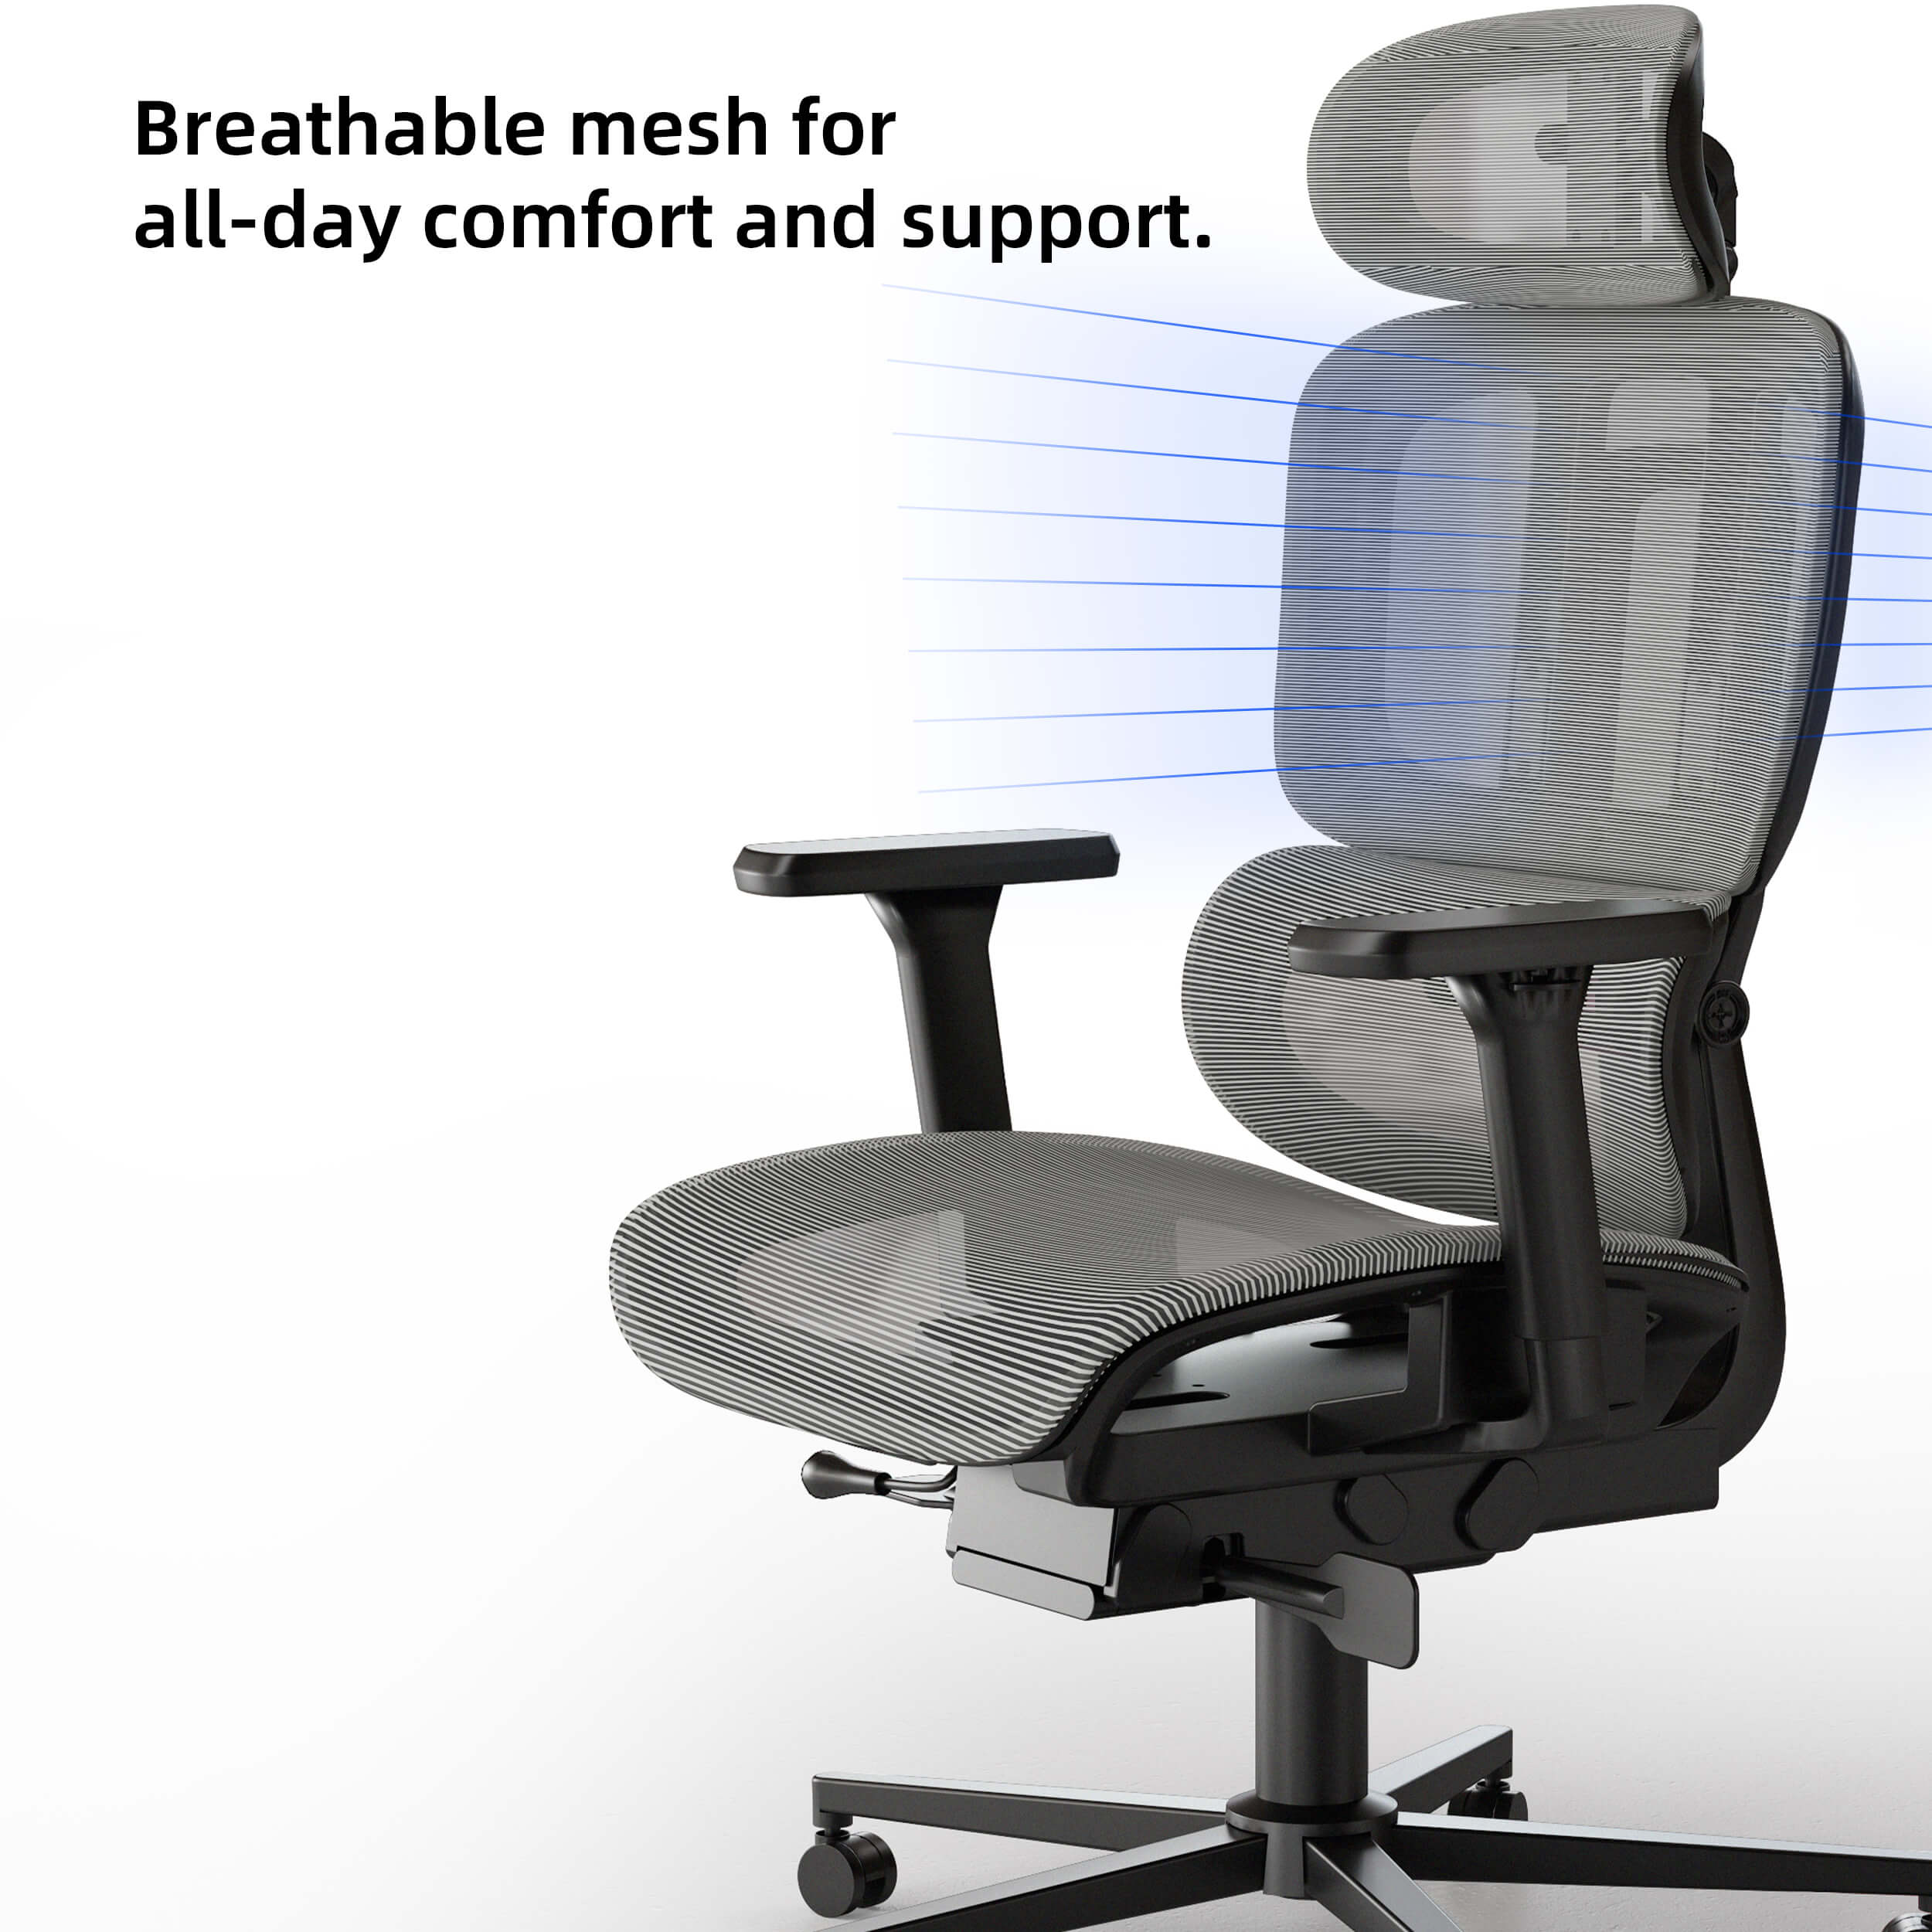 Breathable mesh office chairs with back support for people work comfortable